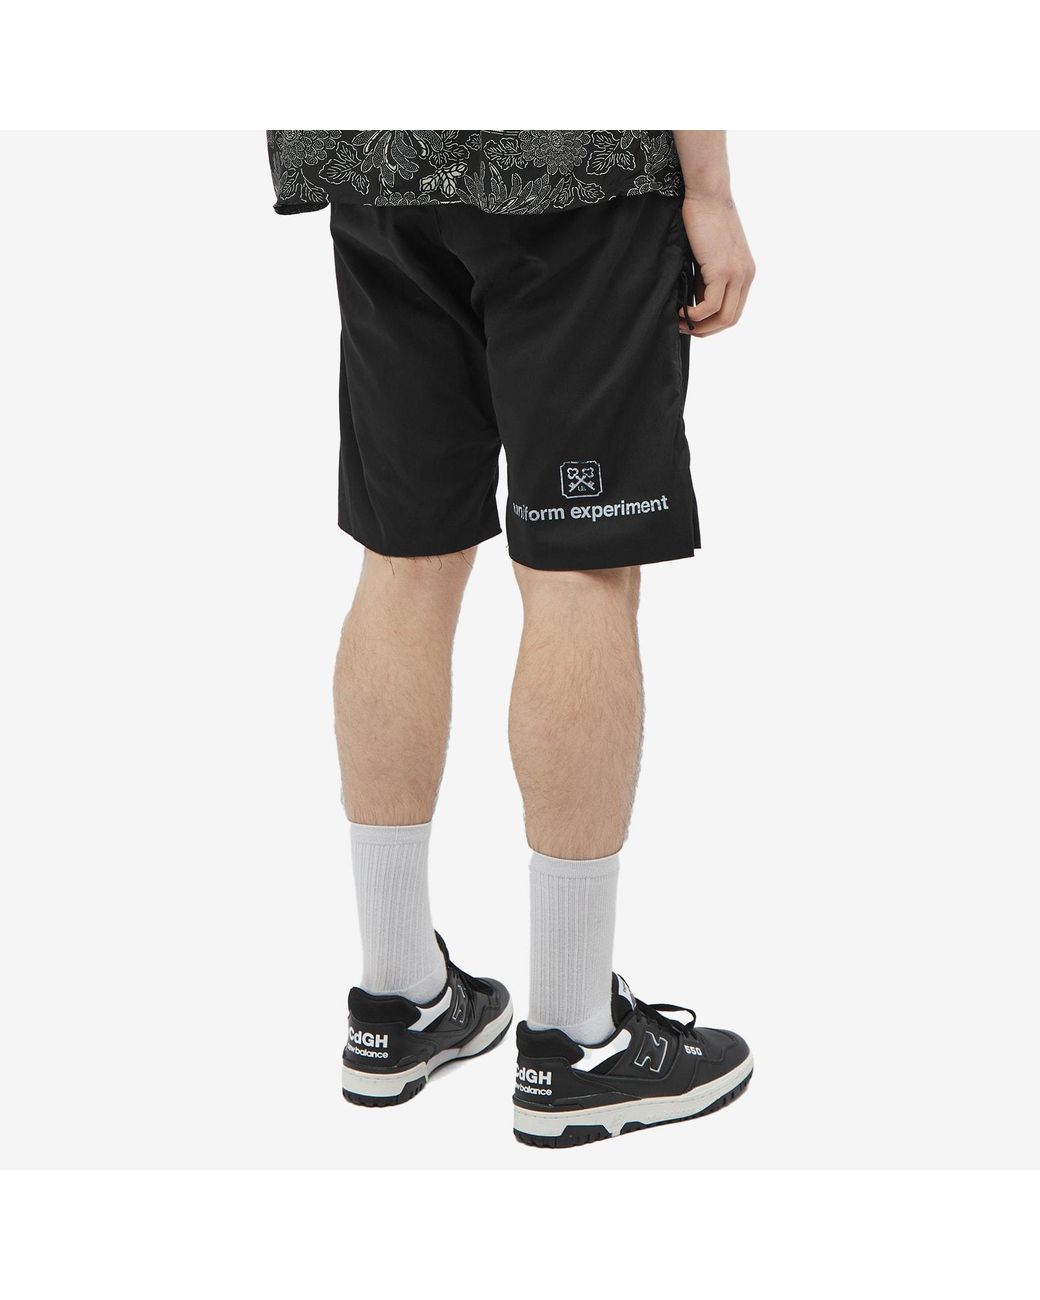 Uniform Experiment Cut Off Chino Short in Black for Men Lyst